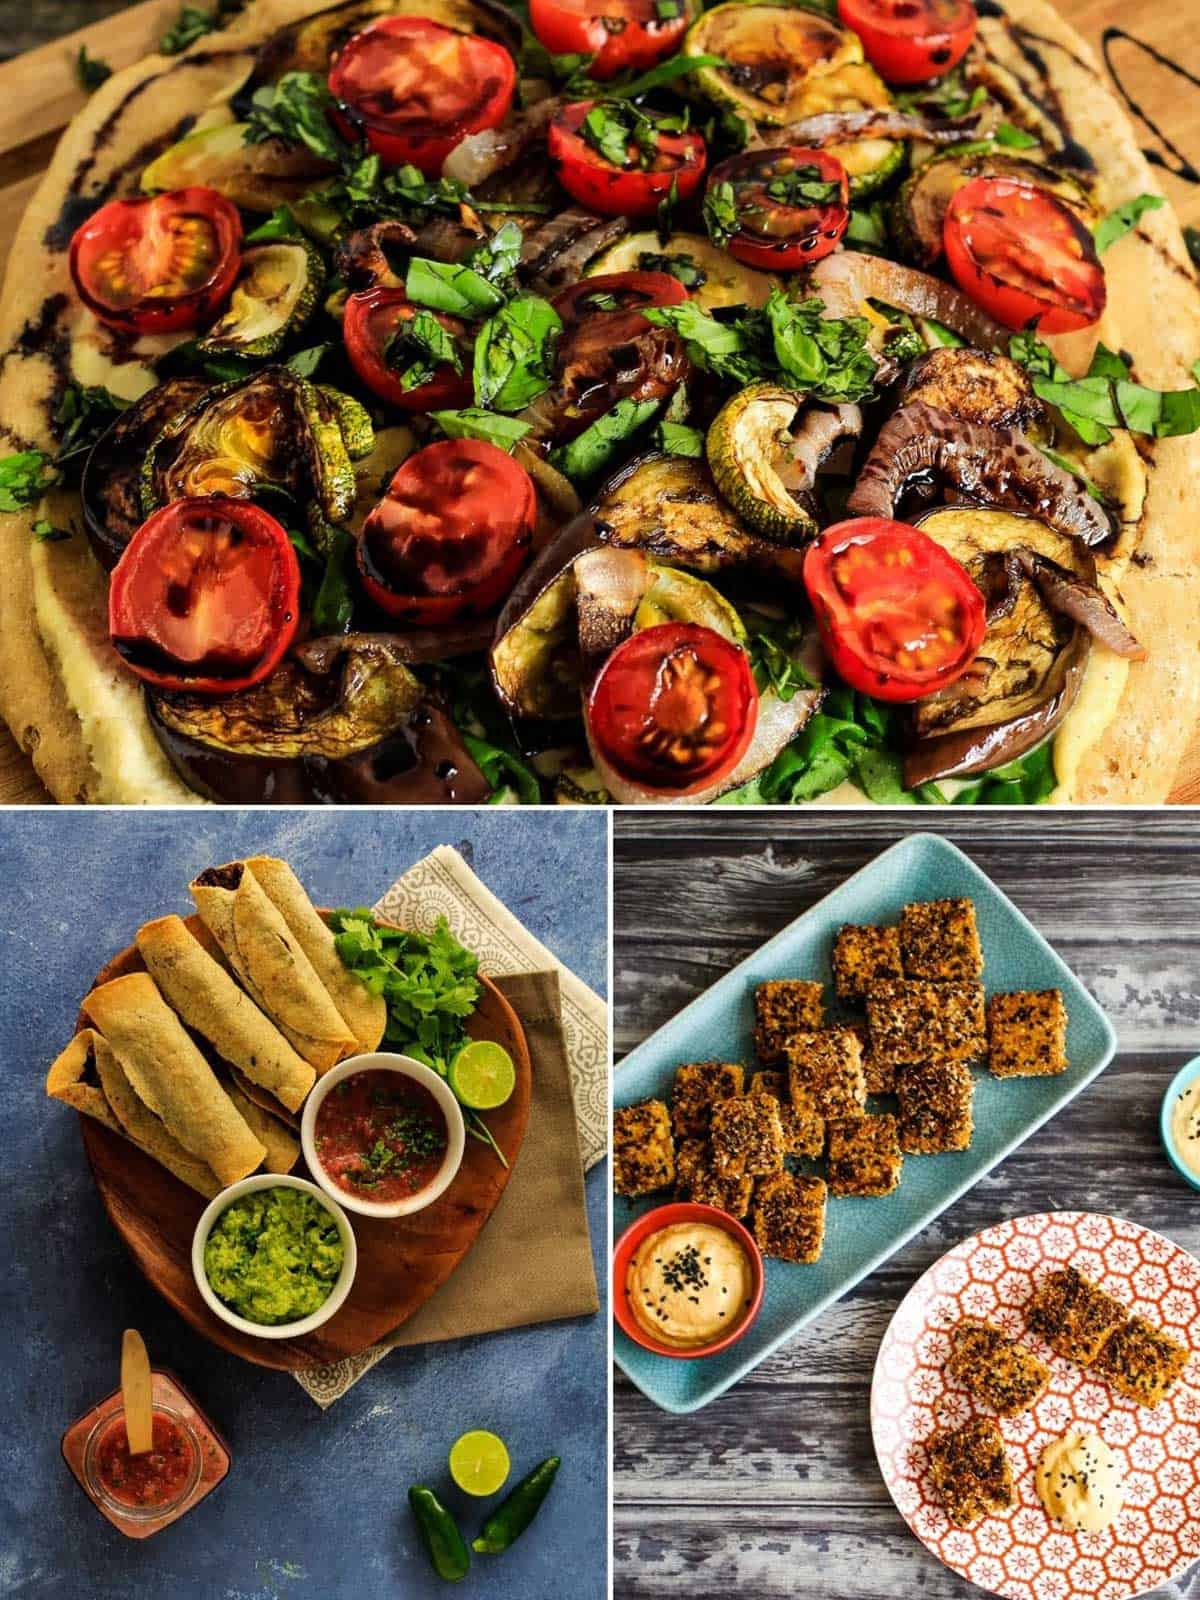 GameDay Vegetarian Snack Recipes - Cook Eat Live Love